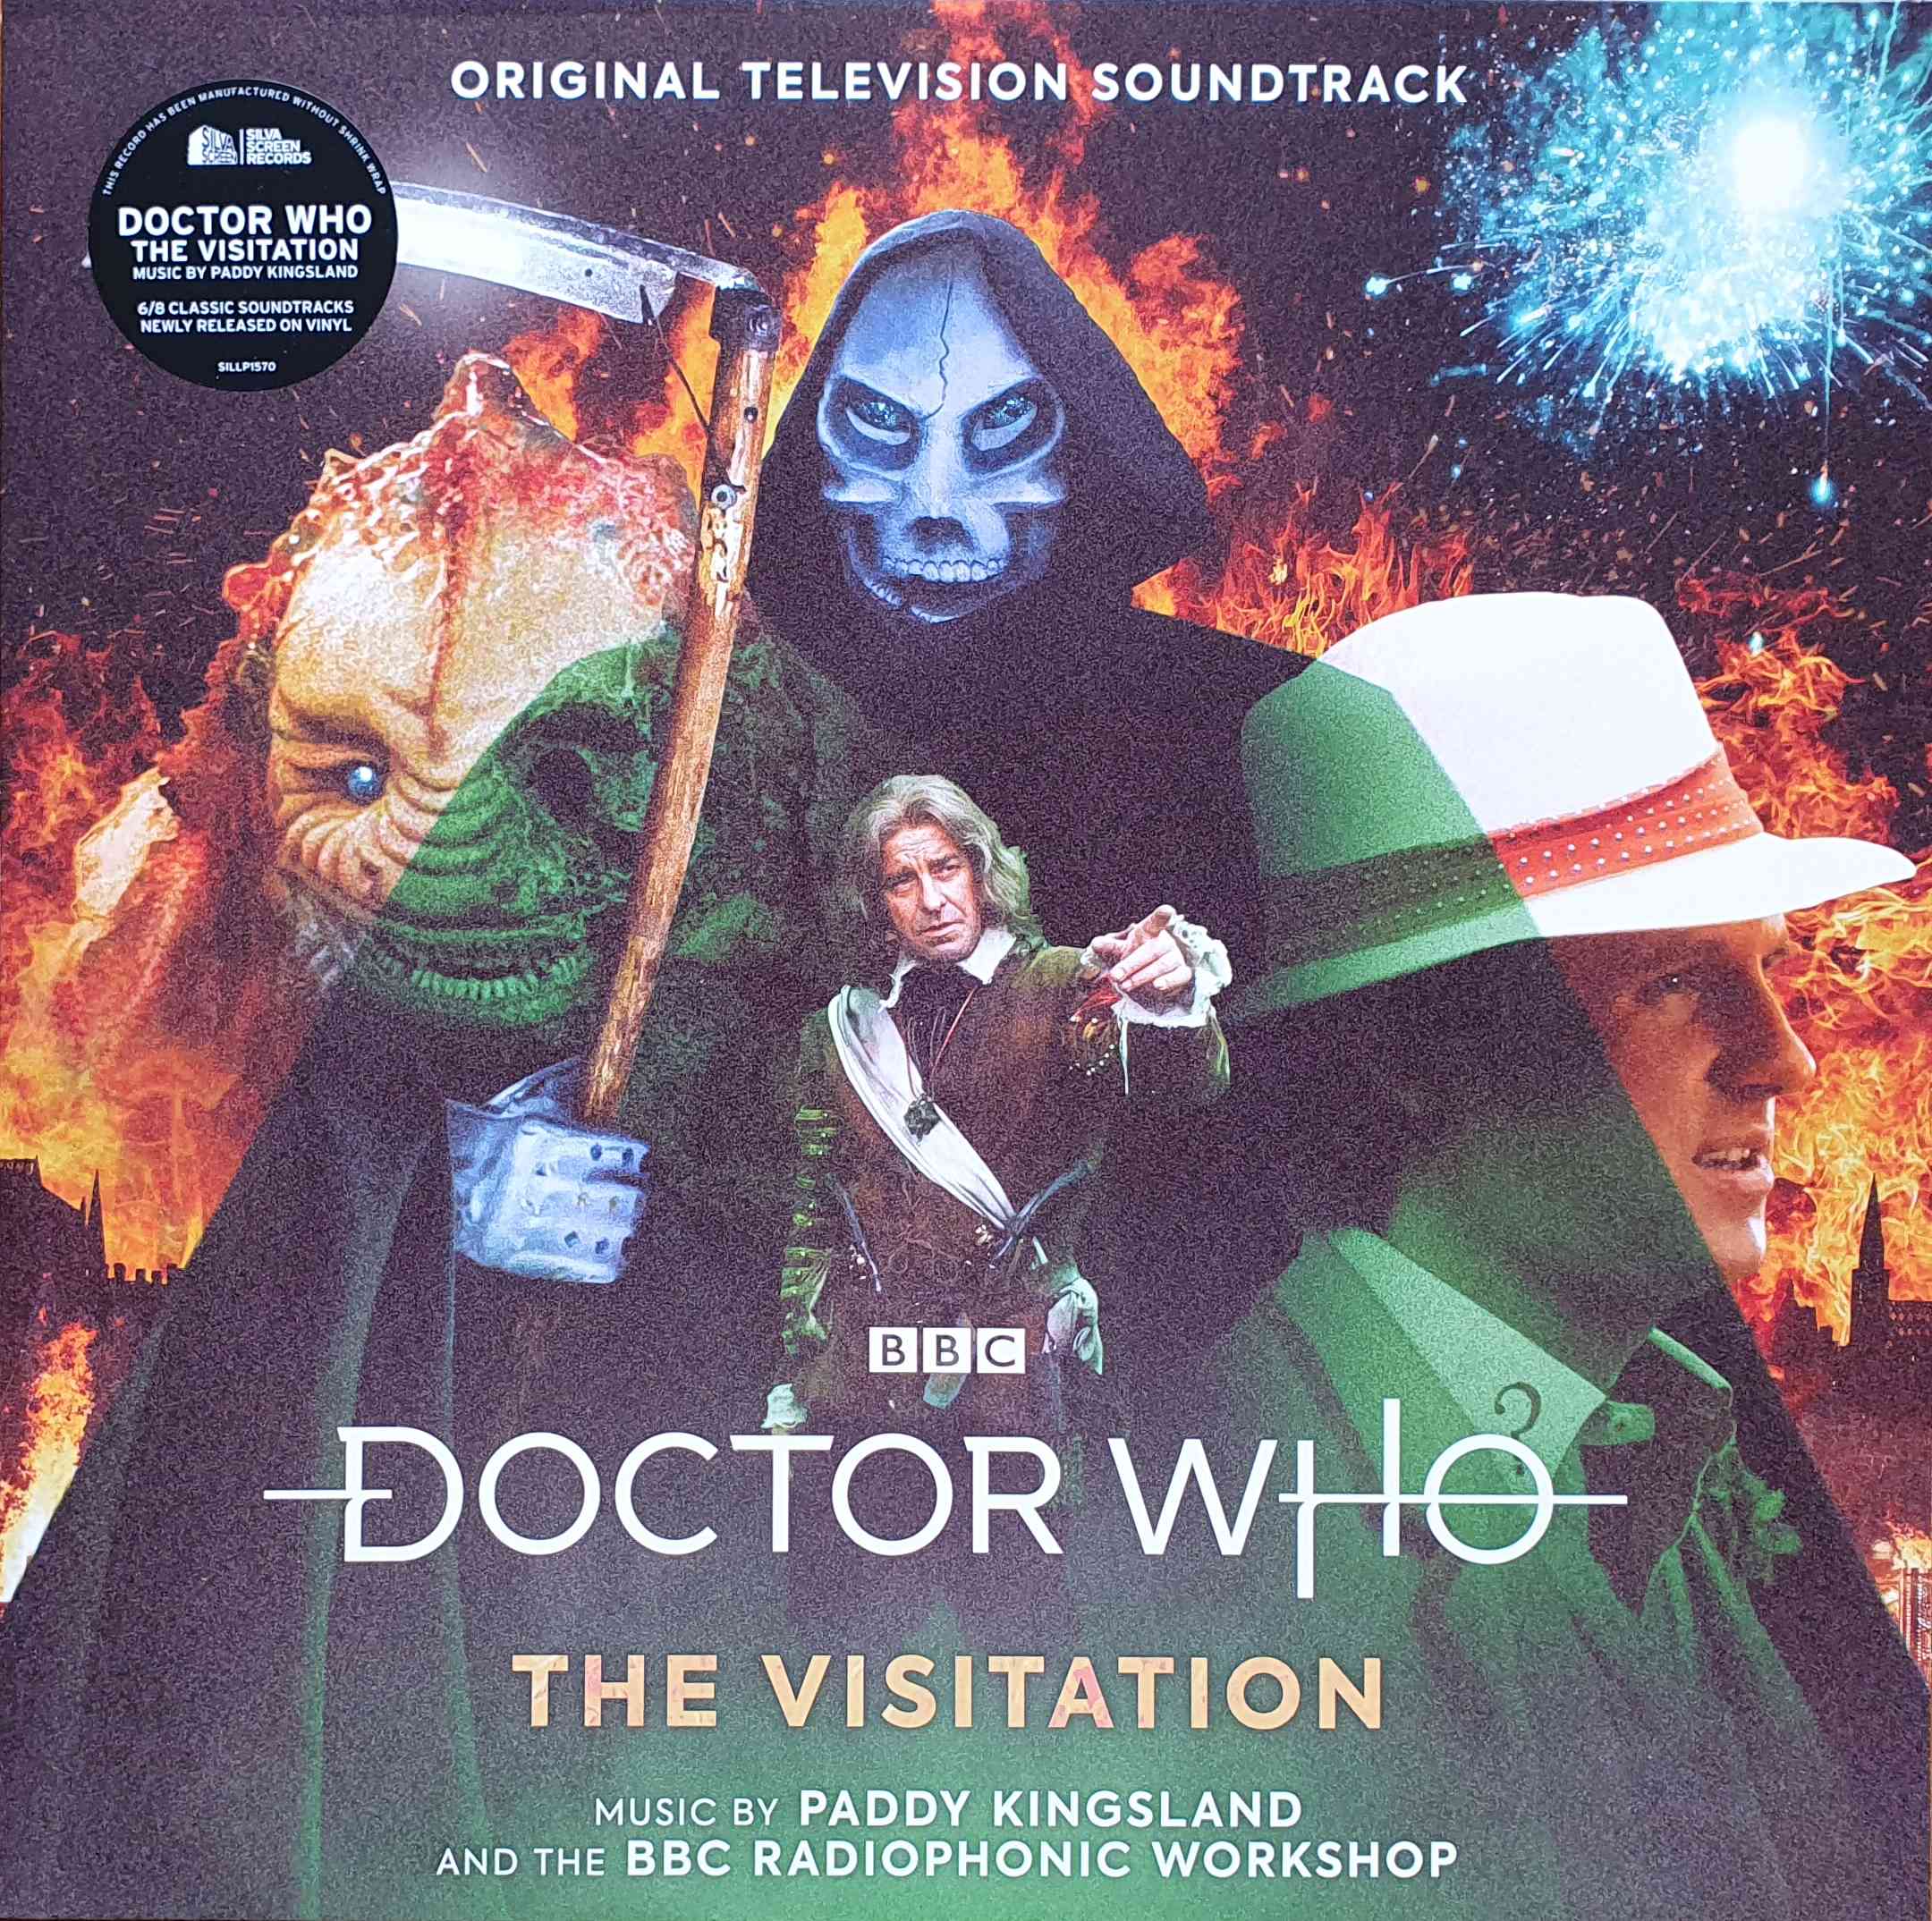 Picture of SILLP 1570 Doctor Who - The visitation by artist Paddy Kingsland / BBC Radiophonic Workshop from the BBC records and Tapes library